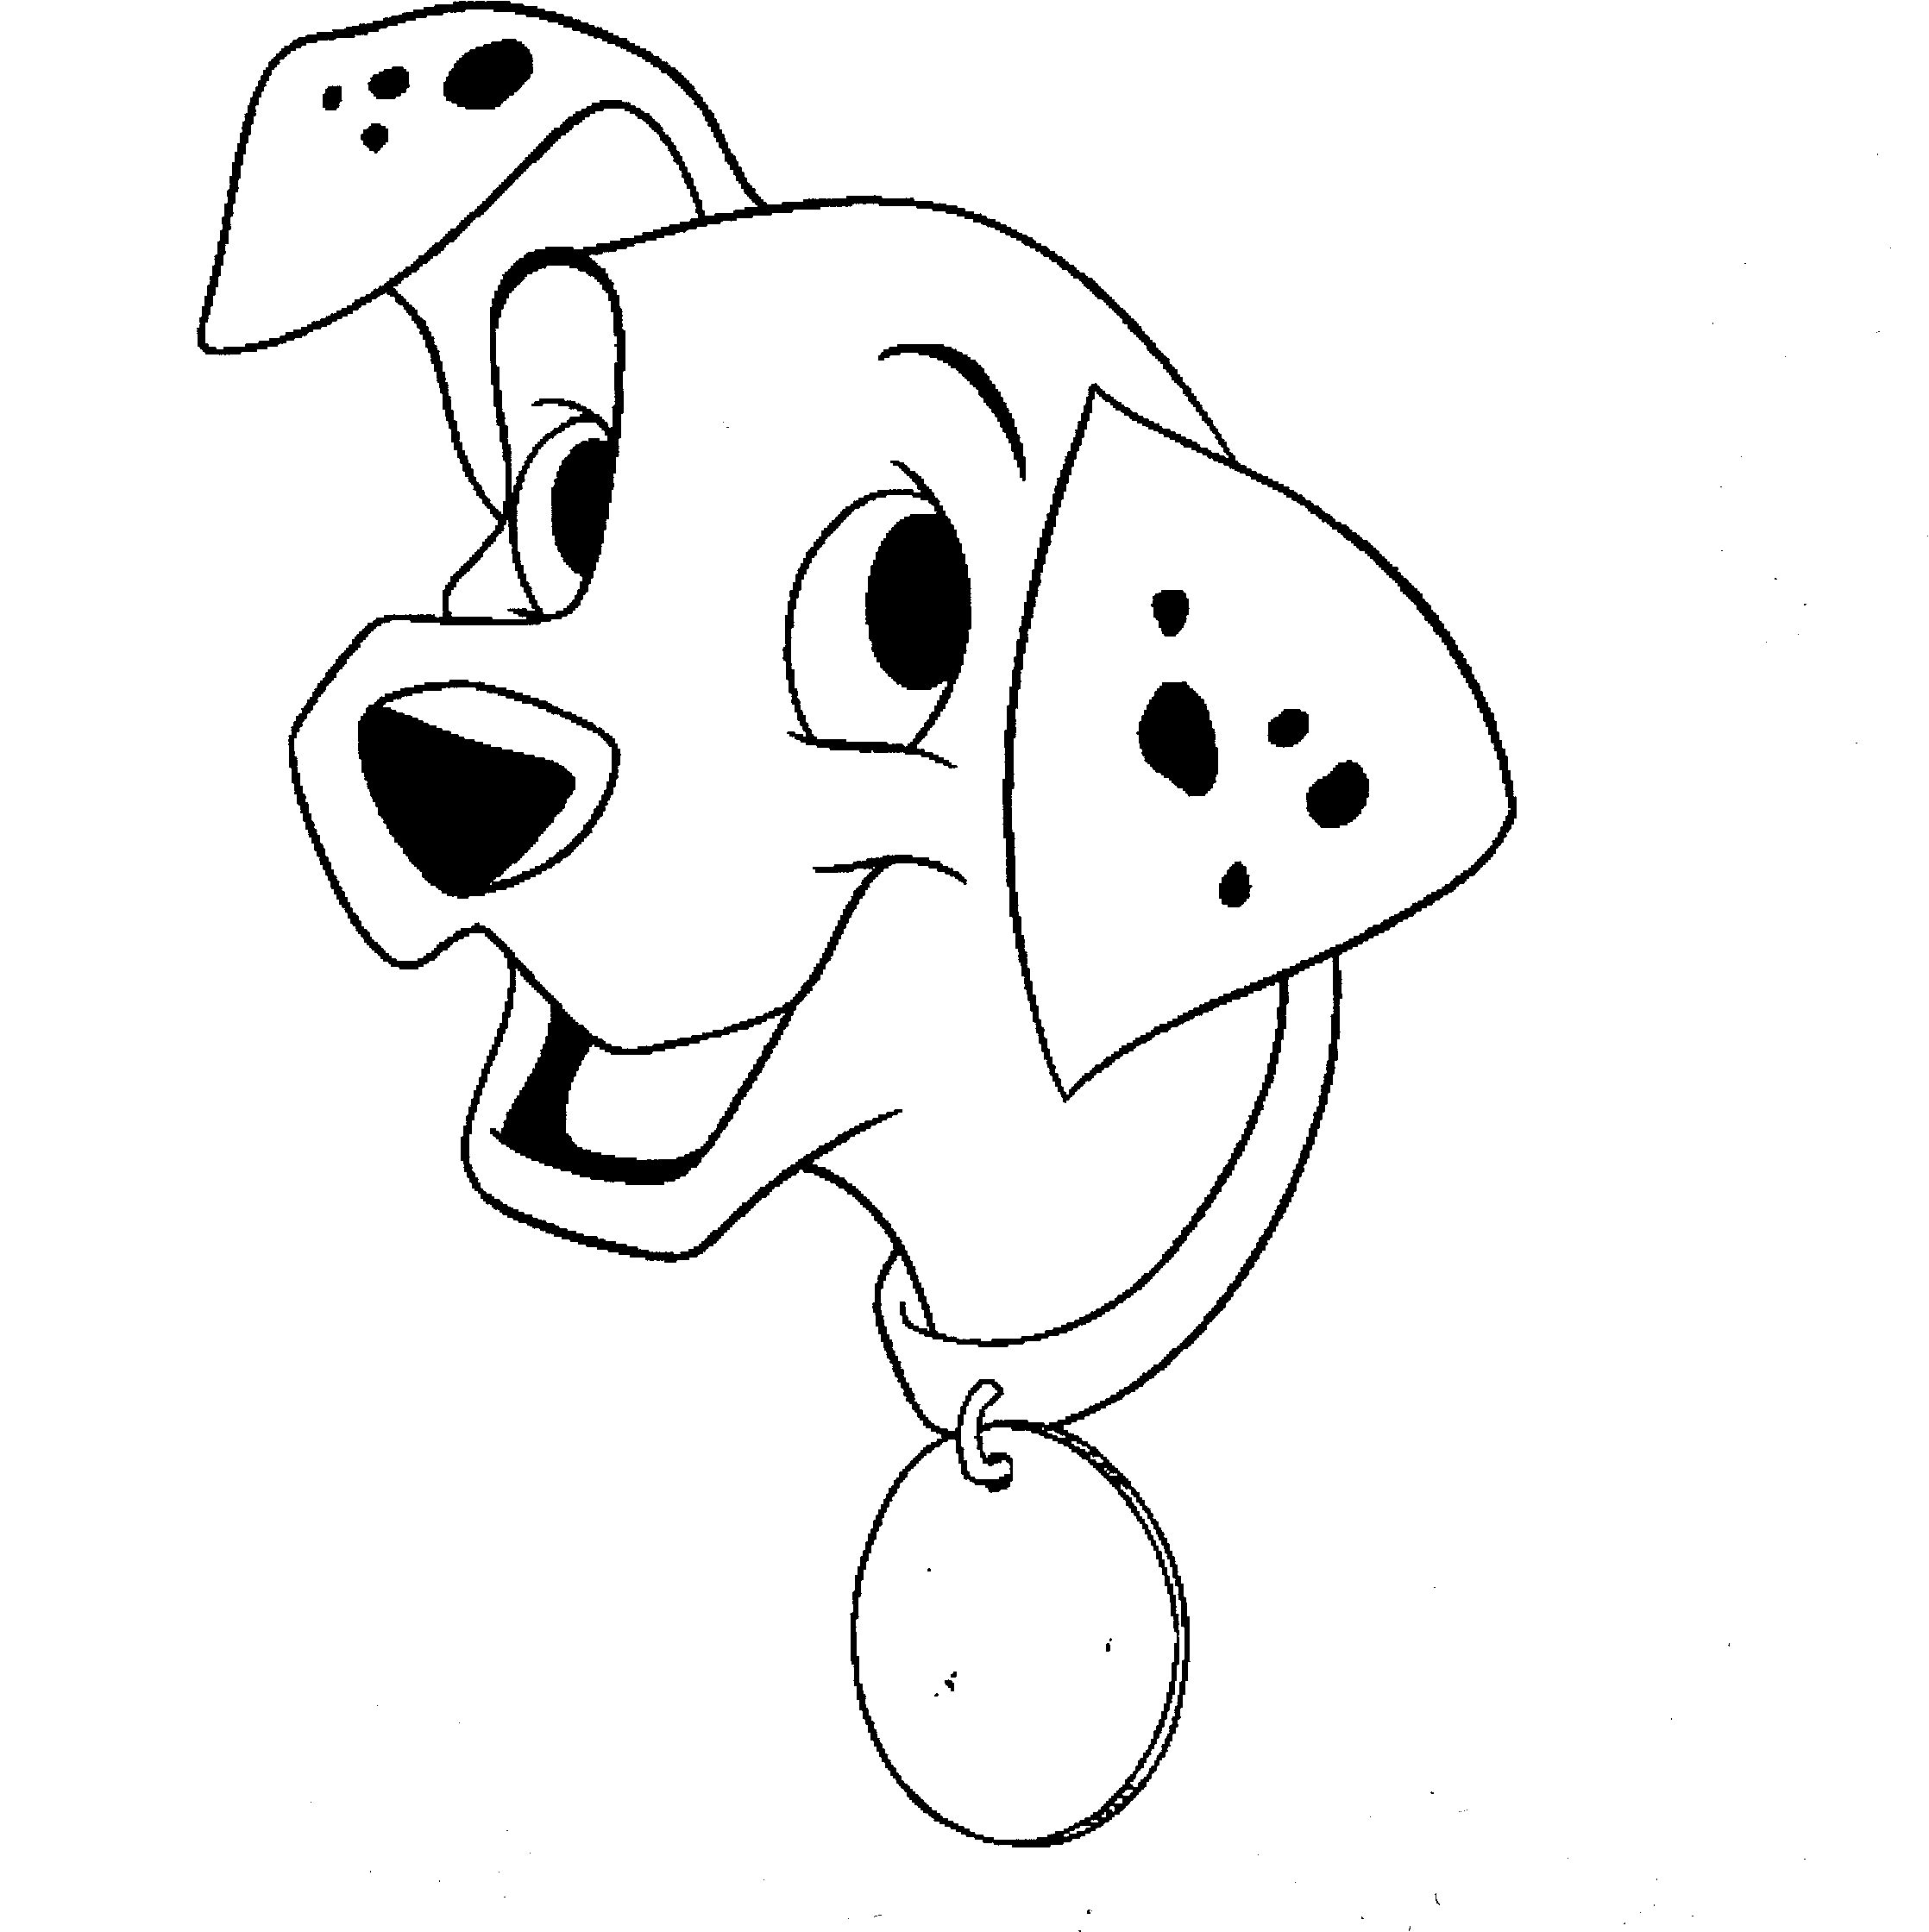 439 Cute Dalmatian Dog Coloring Page with disney character